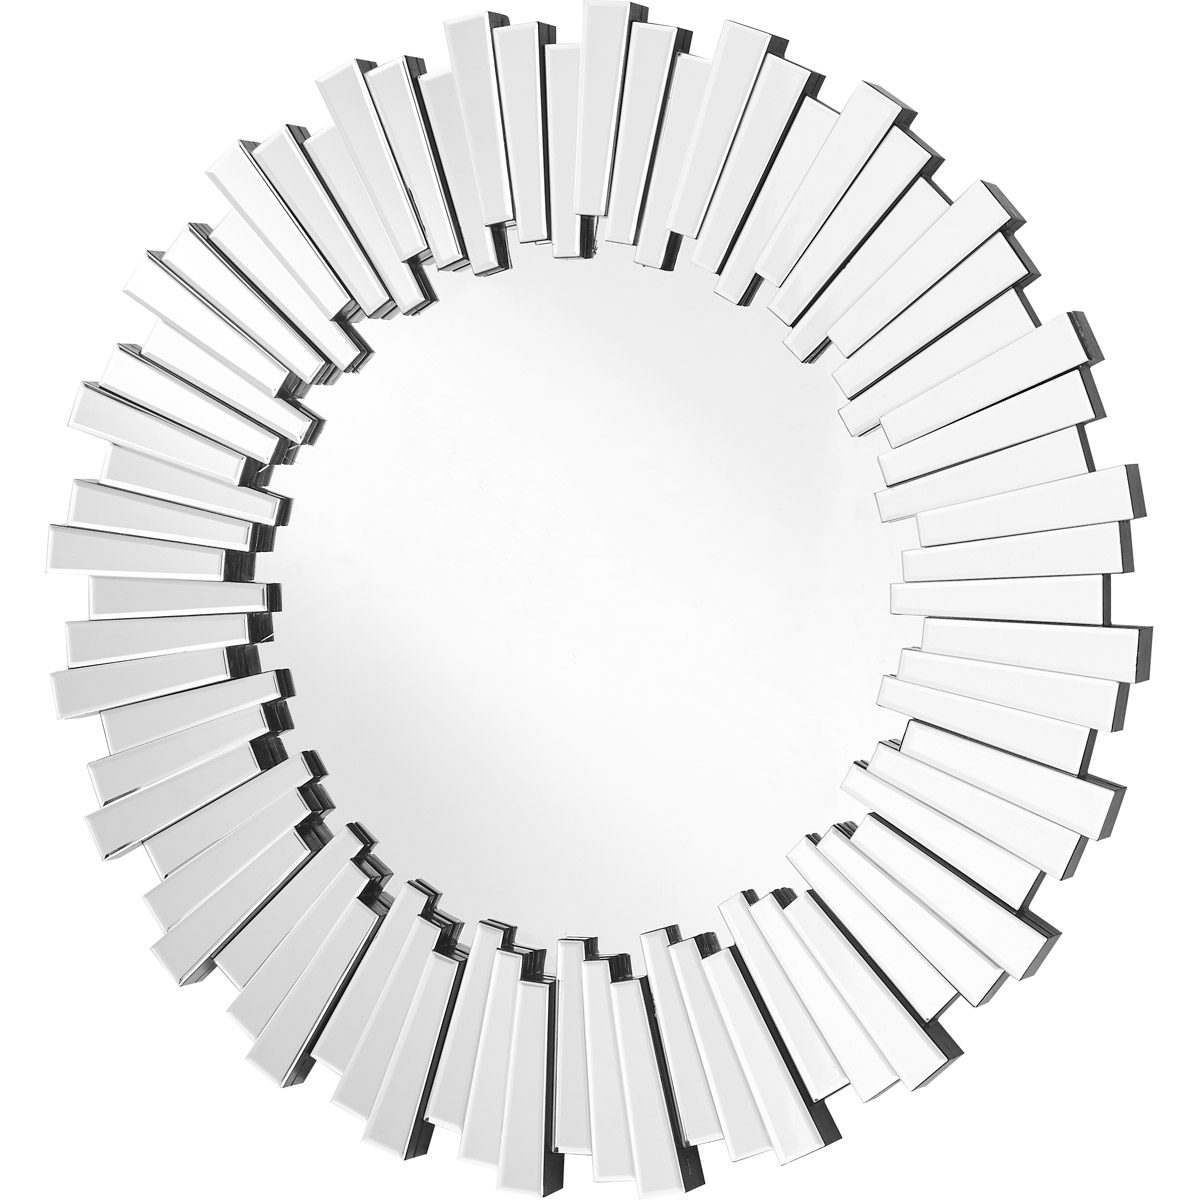 Mr9138 Sparkle 39.5 In. Contemporary Round Mirror - Dozens Of Expertly Cut Beveled Edge Mirror Pieces, Clear